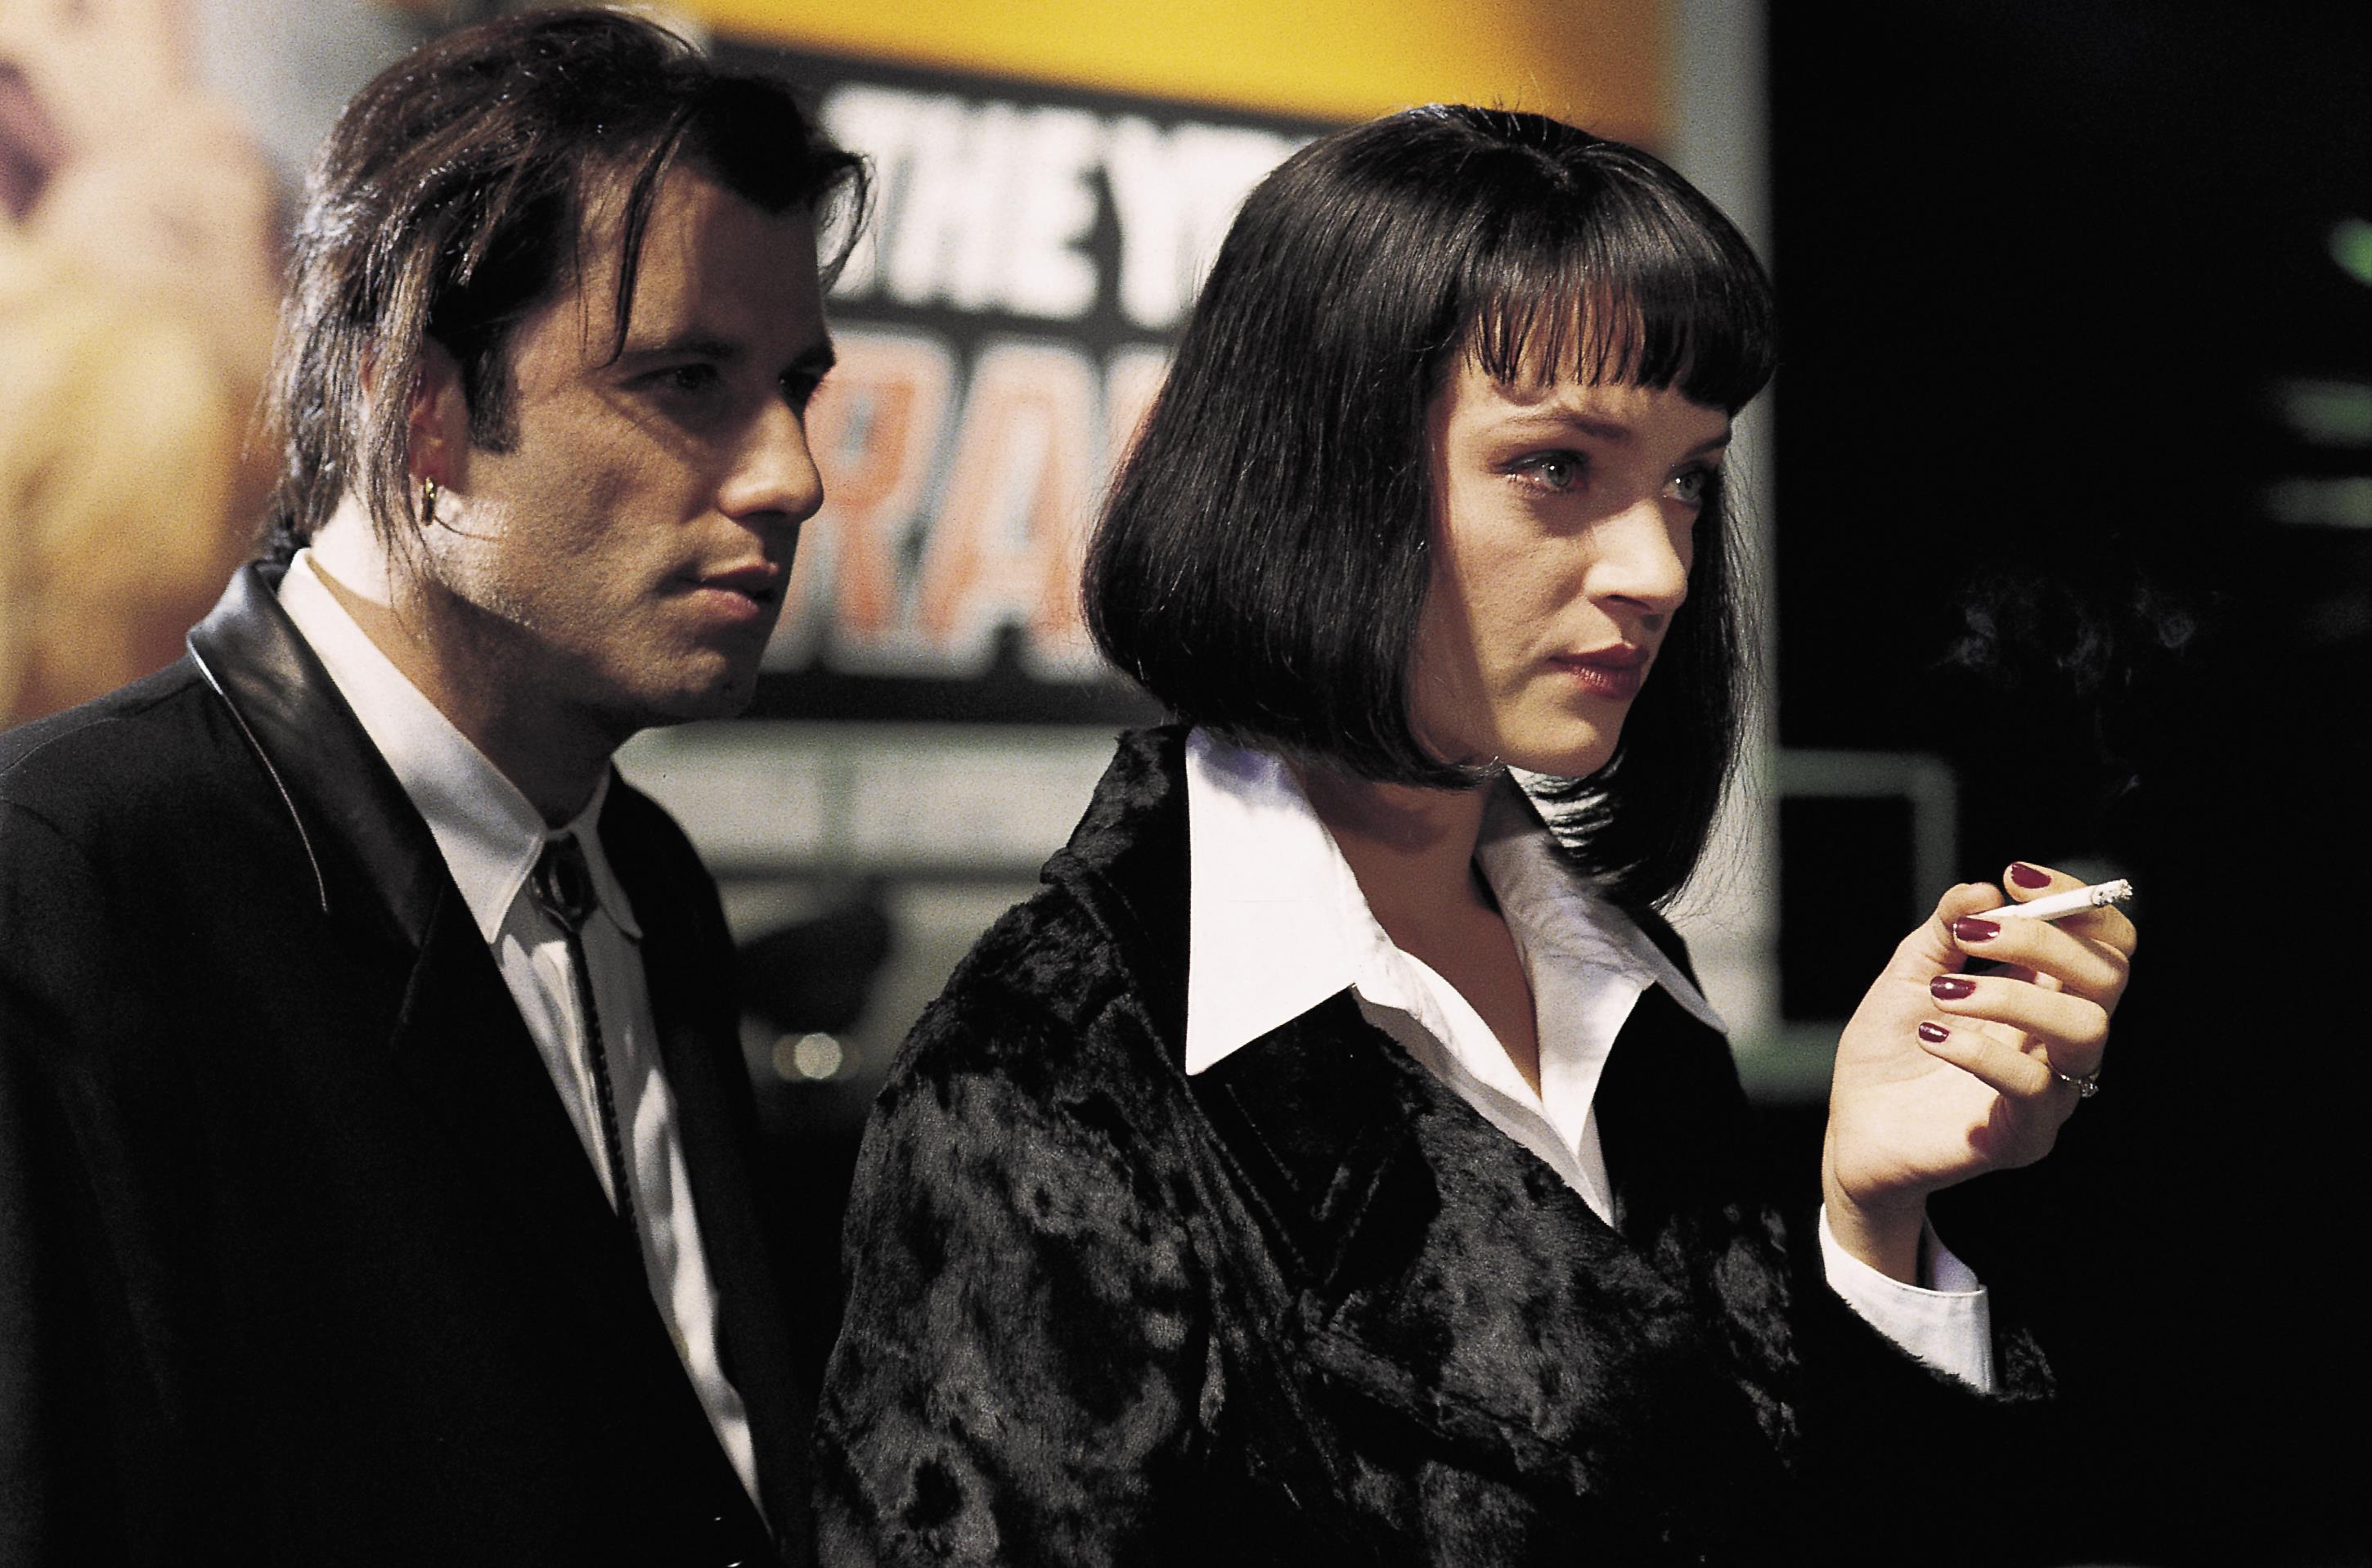 Pulp Fiction ©Images courtesy of Park Circus Paramount (13).jpg (521 KB)